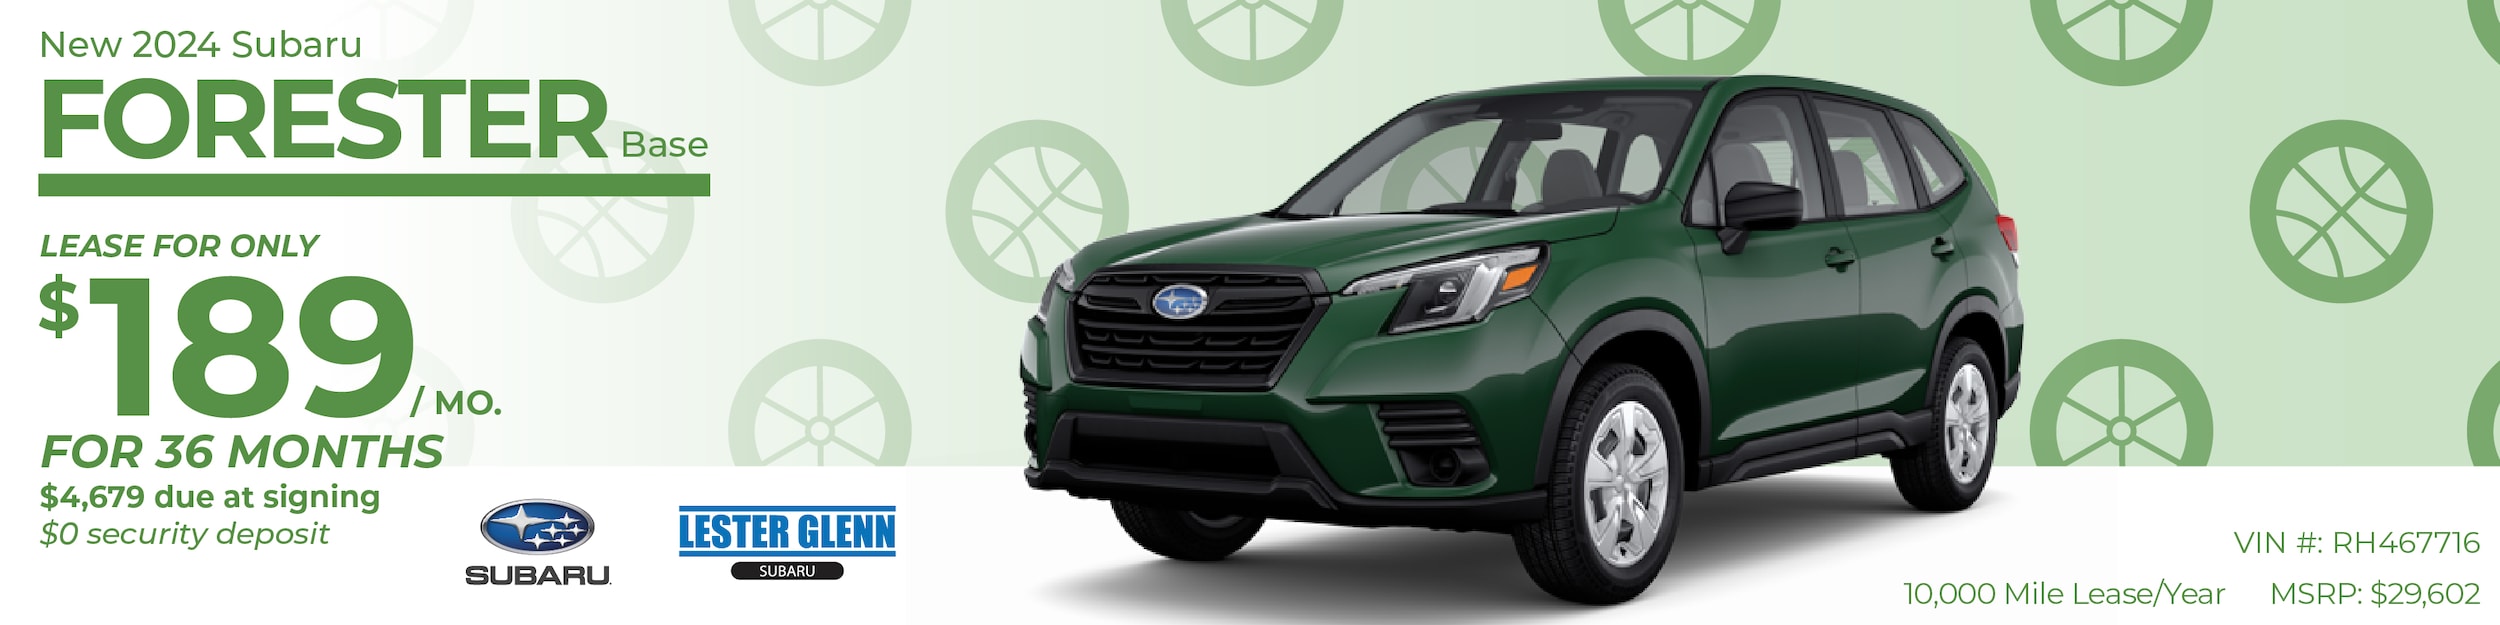 2024 Subaru Forester Lease And Finance Offers Toms River, NJ